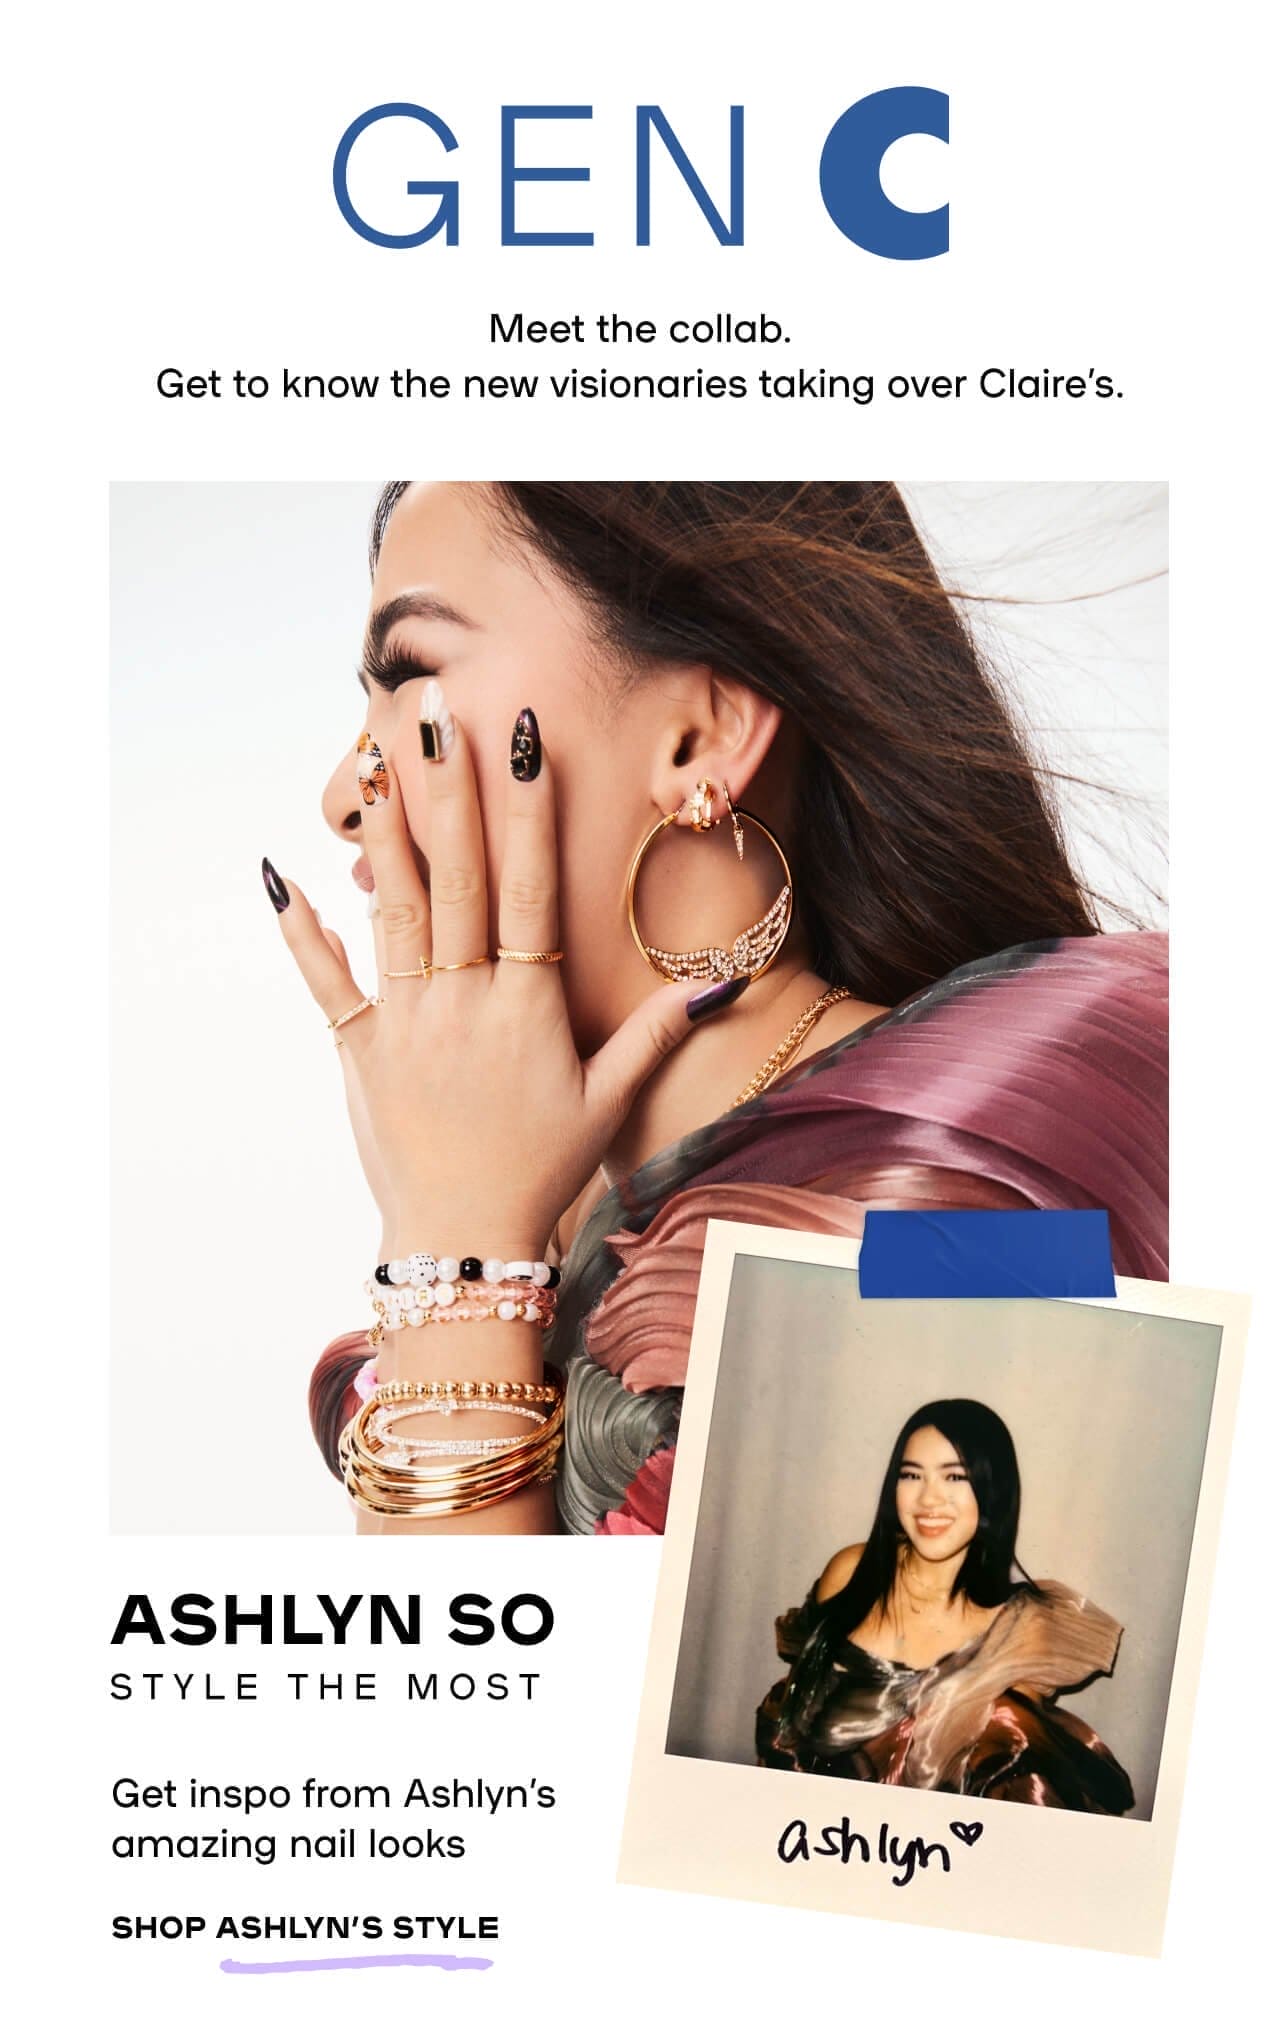 Gen C Meet the collab. Get to know the new visionaries taking over Claire’s. Ashlyn So Style The Most Get inspo from Ashlyn’s amazing nail looks